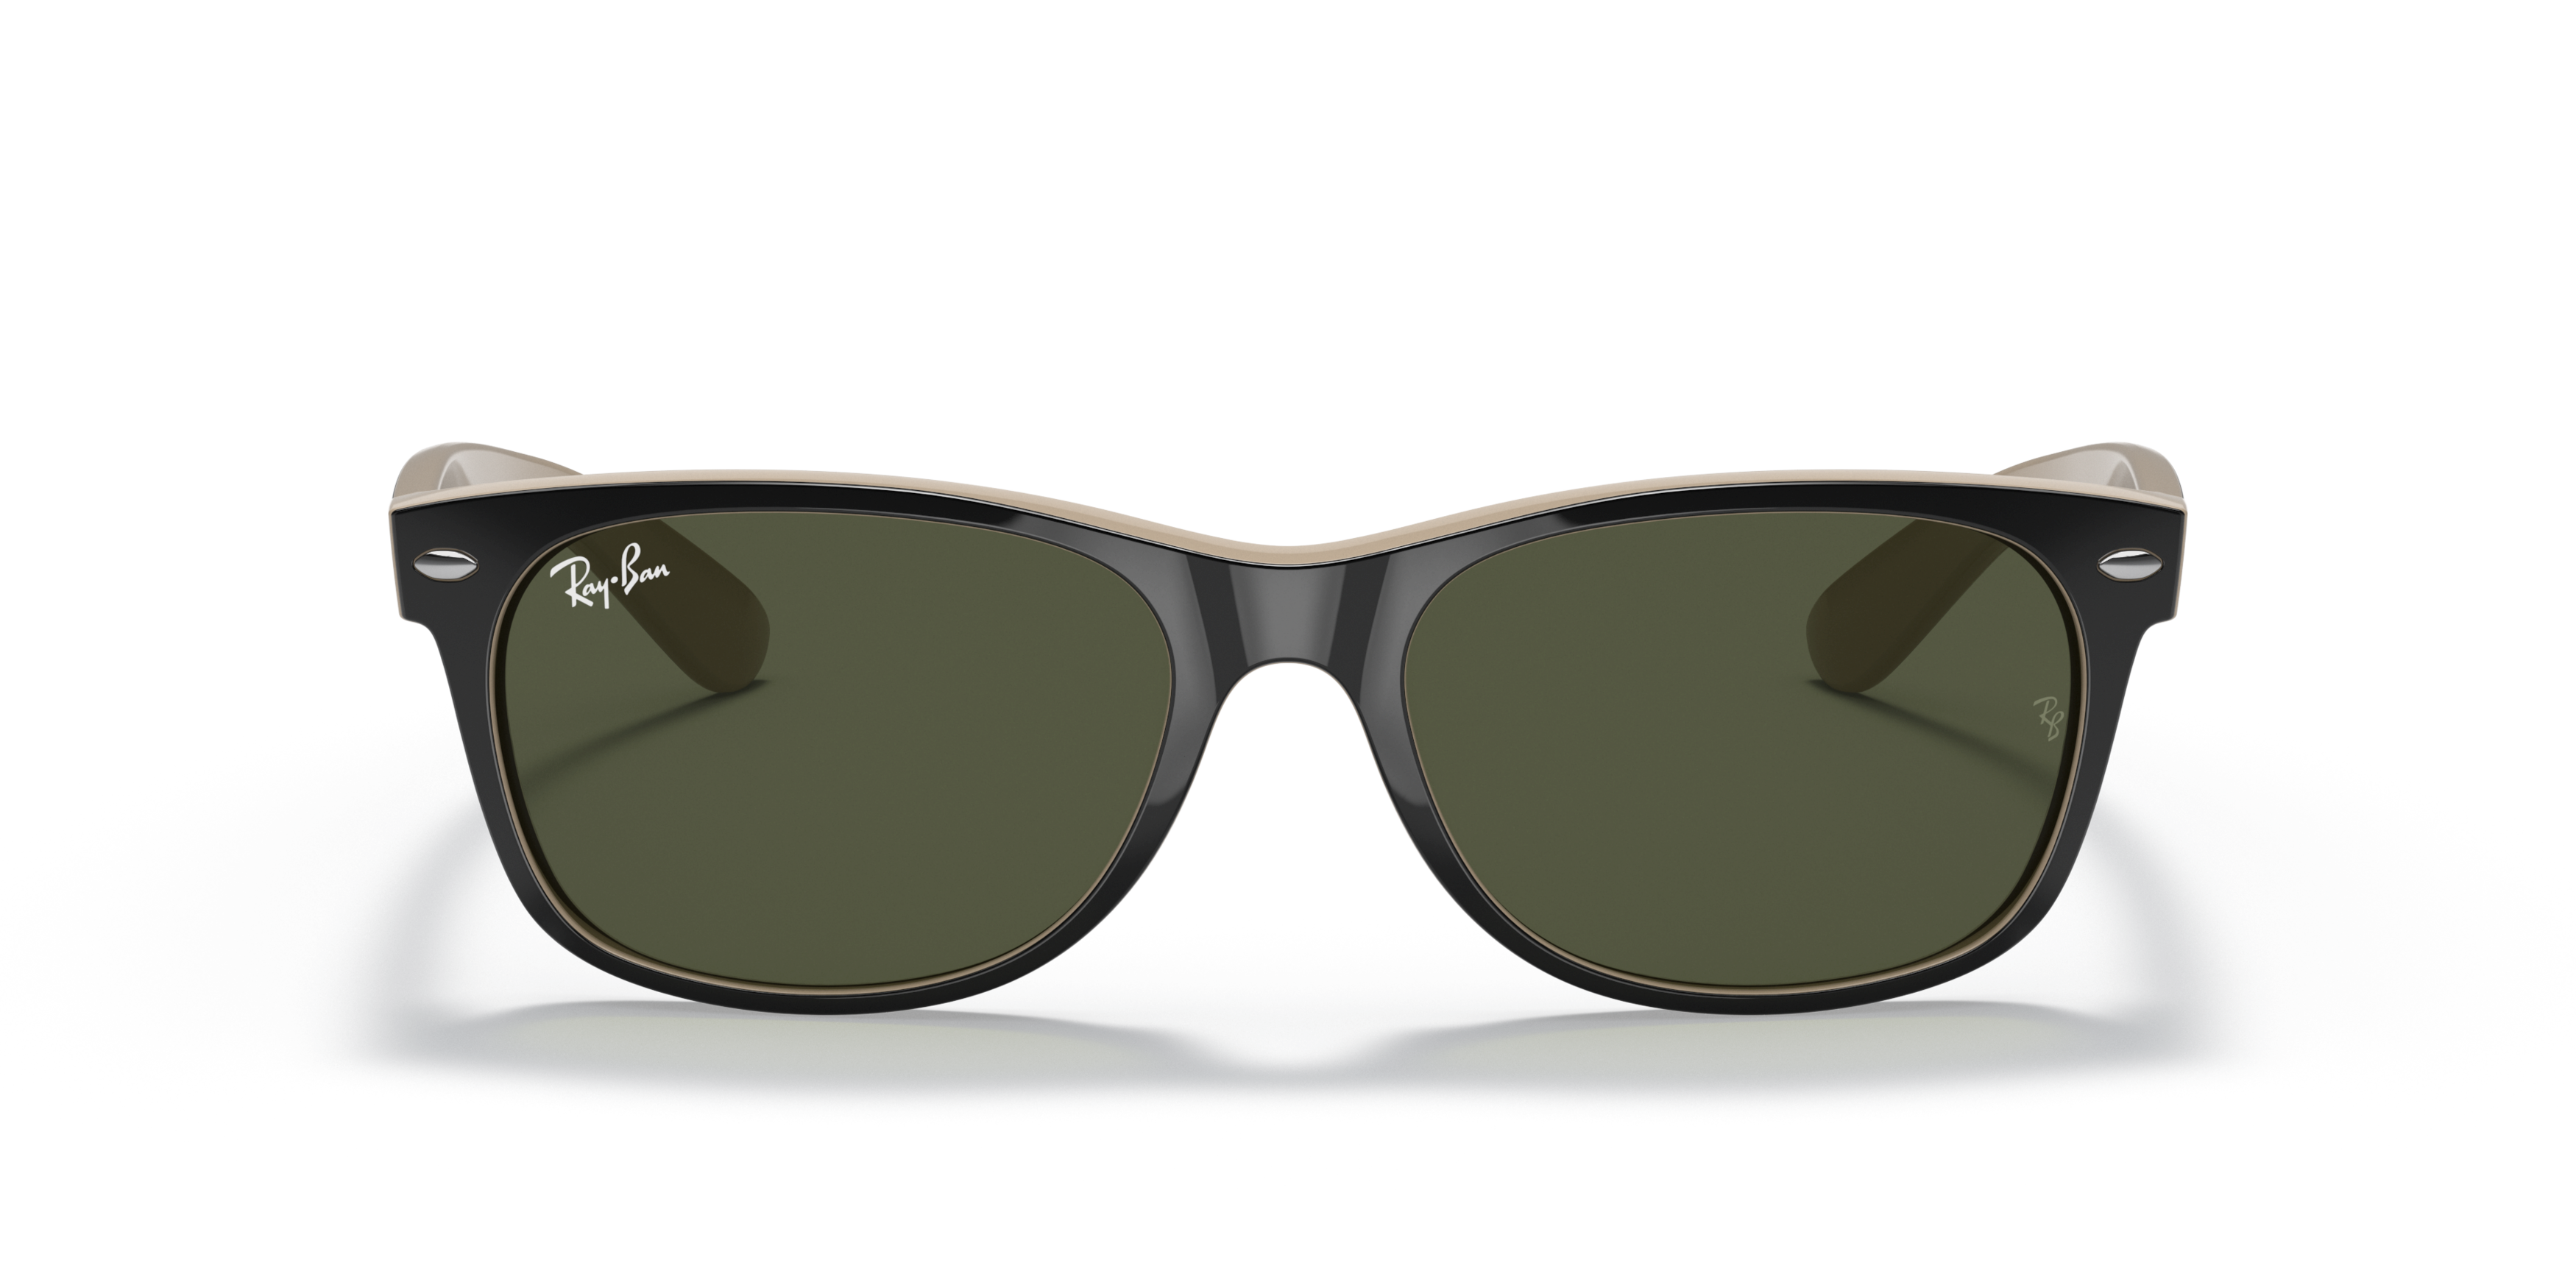 [products.image.front] Ray-Ban New Wayfarer RB2132 875